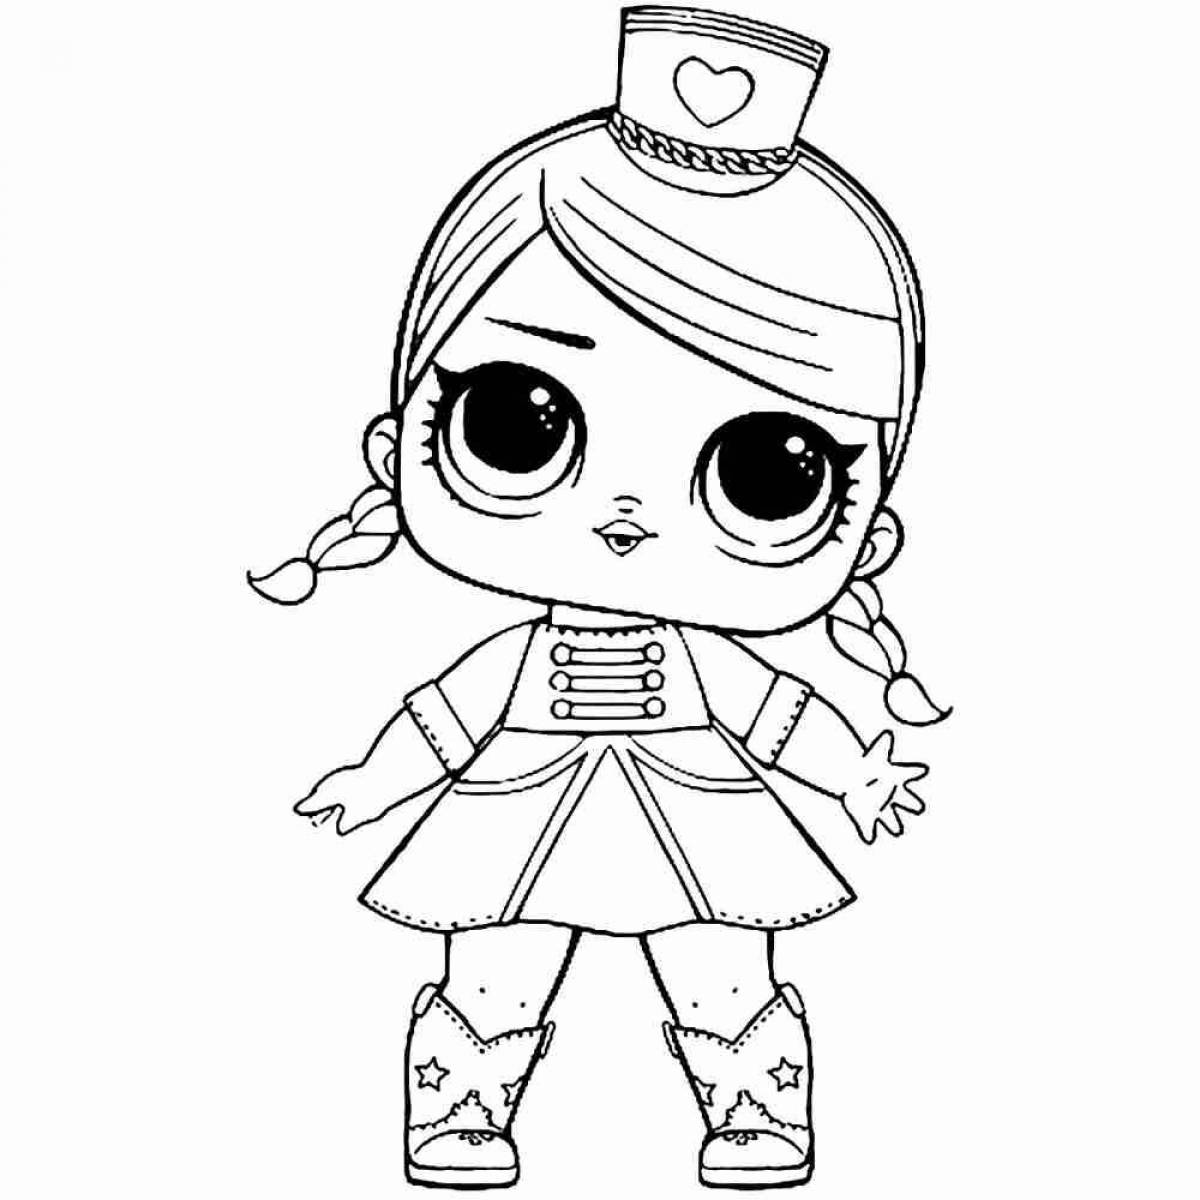 Playful coloring page of lola dolls for kids